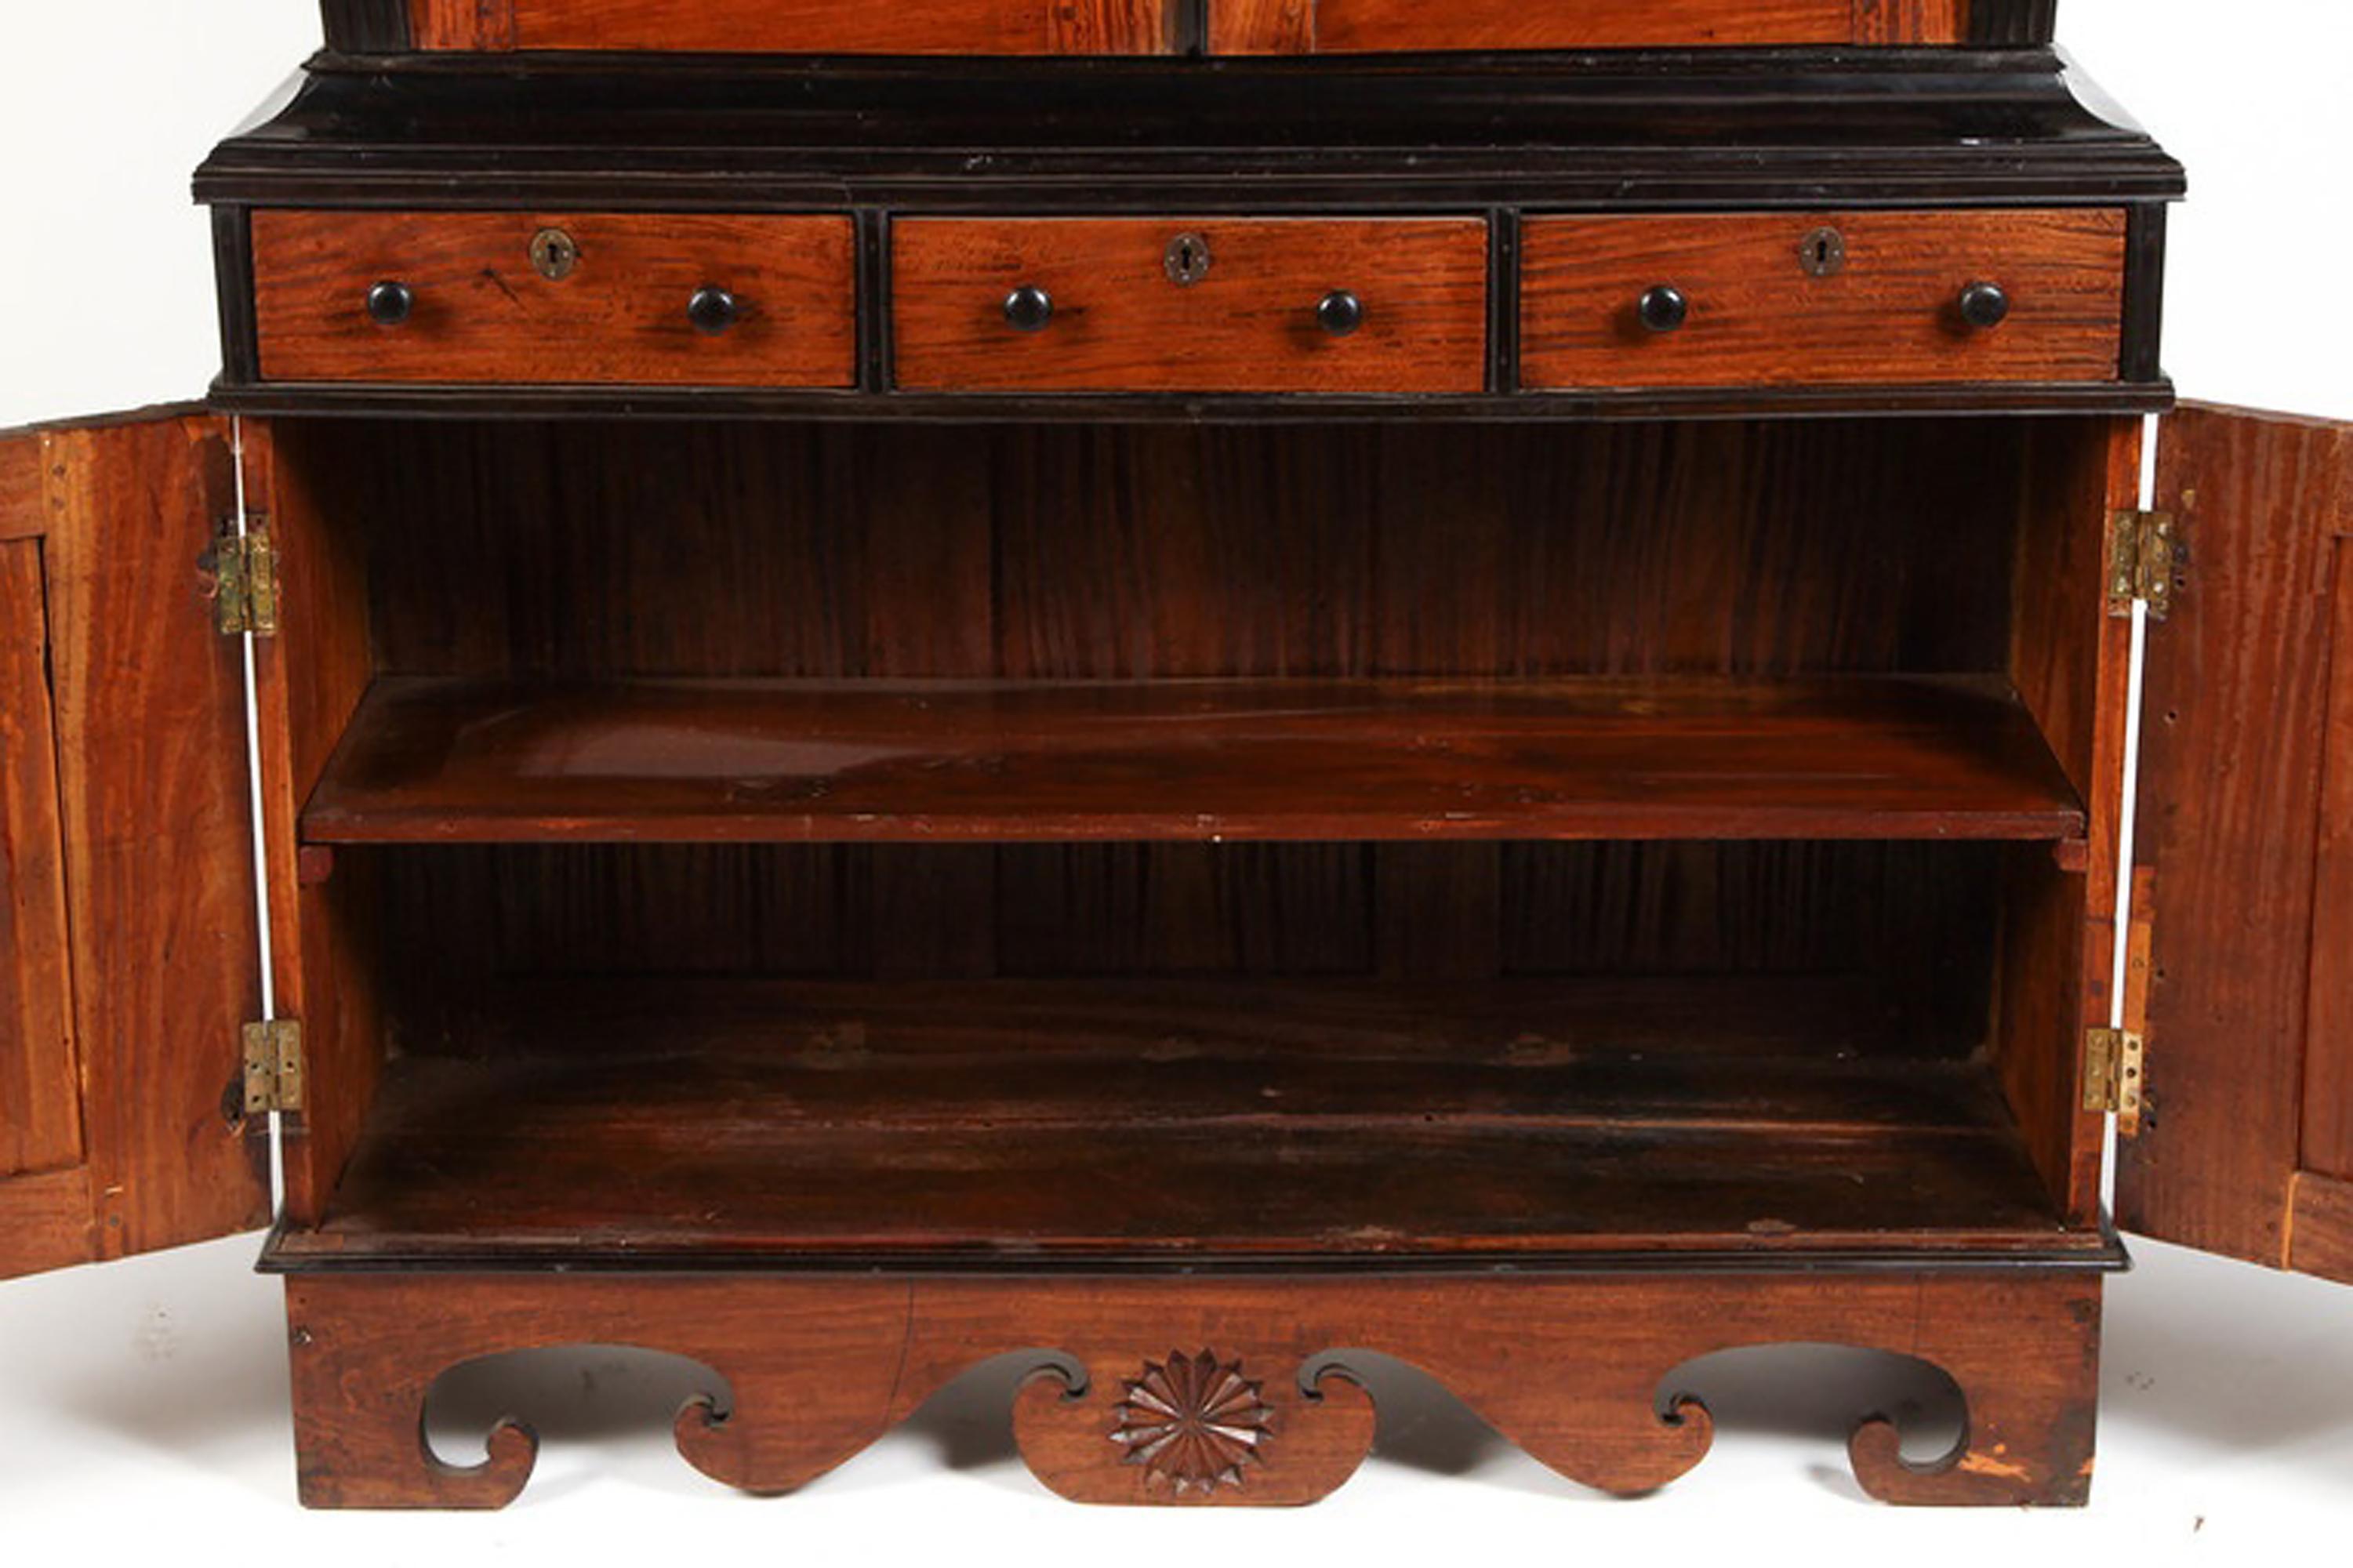 19th Century British Colonial Ceylonese Satinwood and Ebony Cabinet In Good Condition For Sale In Pasadena, CA